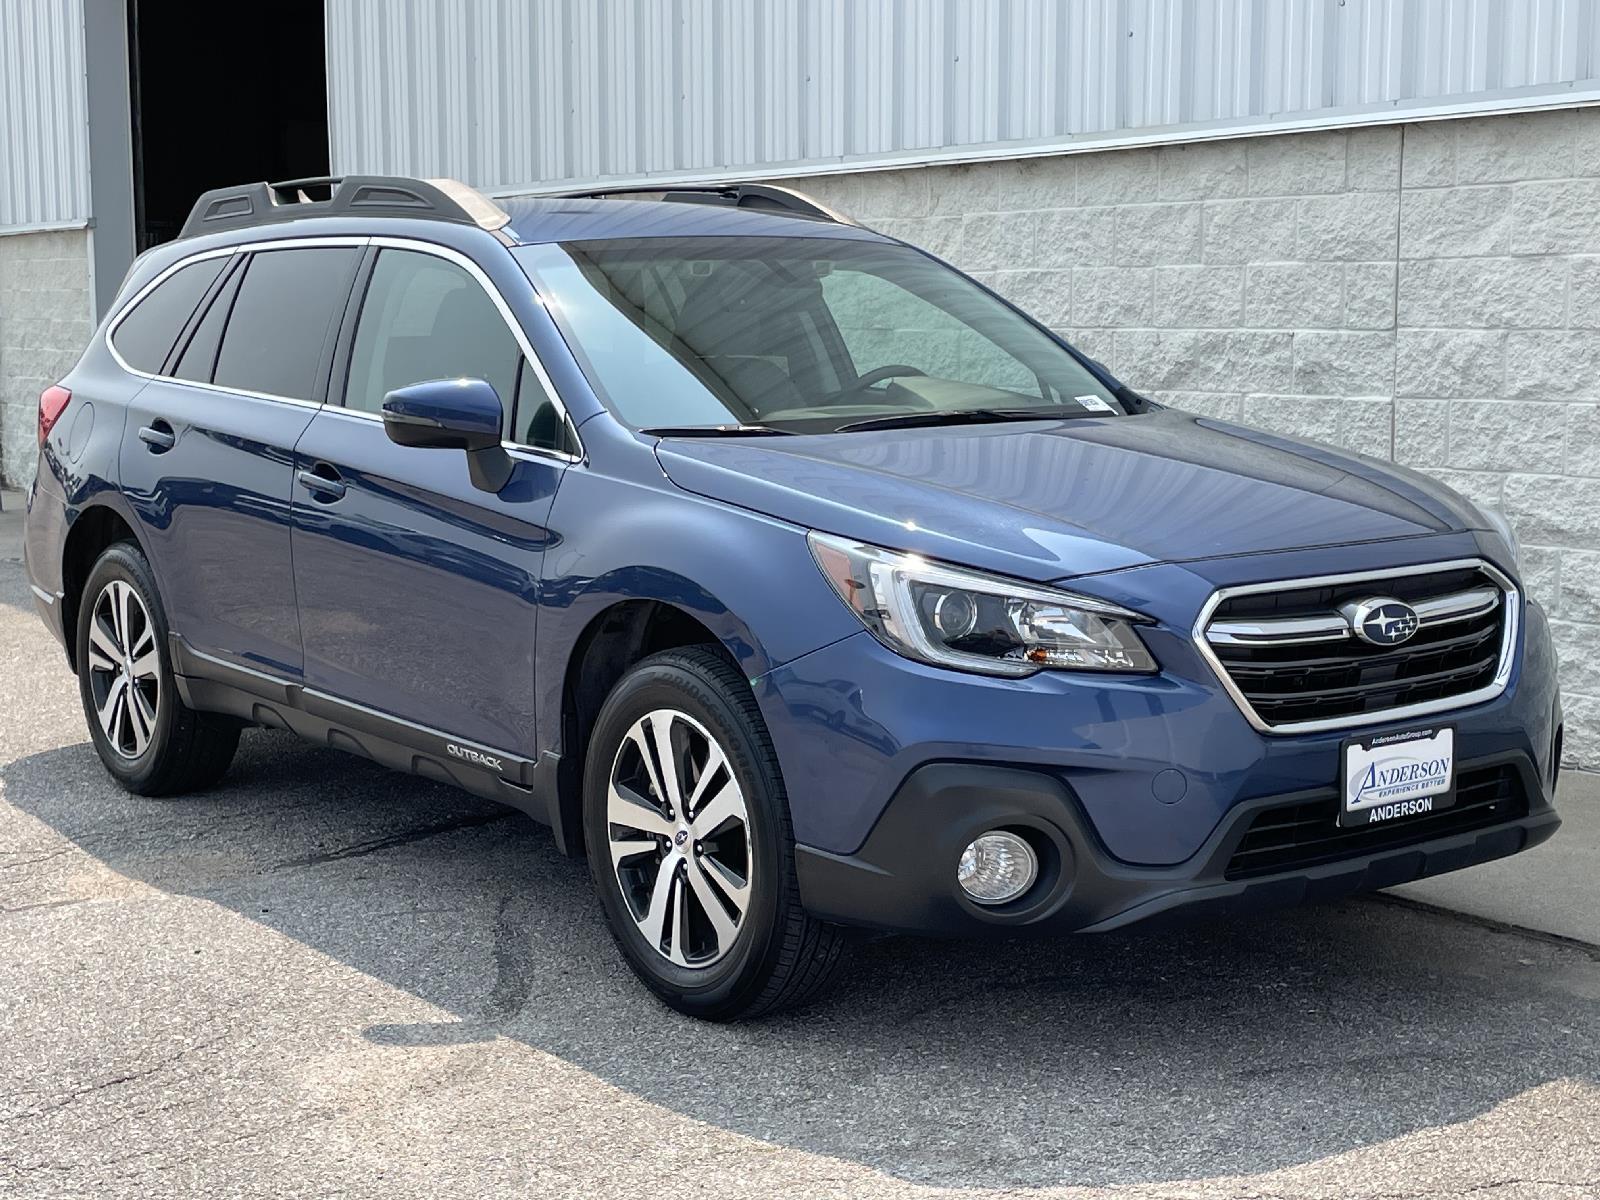 Used 2019 Subaru Outback Limited SUV for sale in Lincoln NE